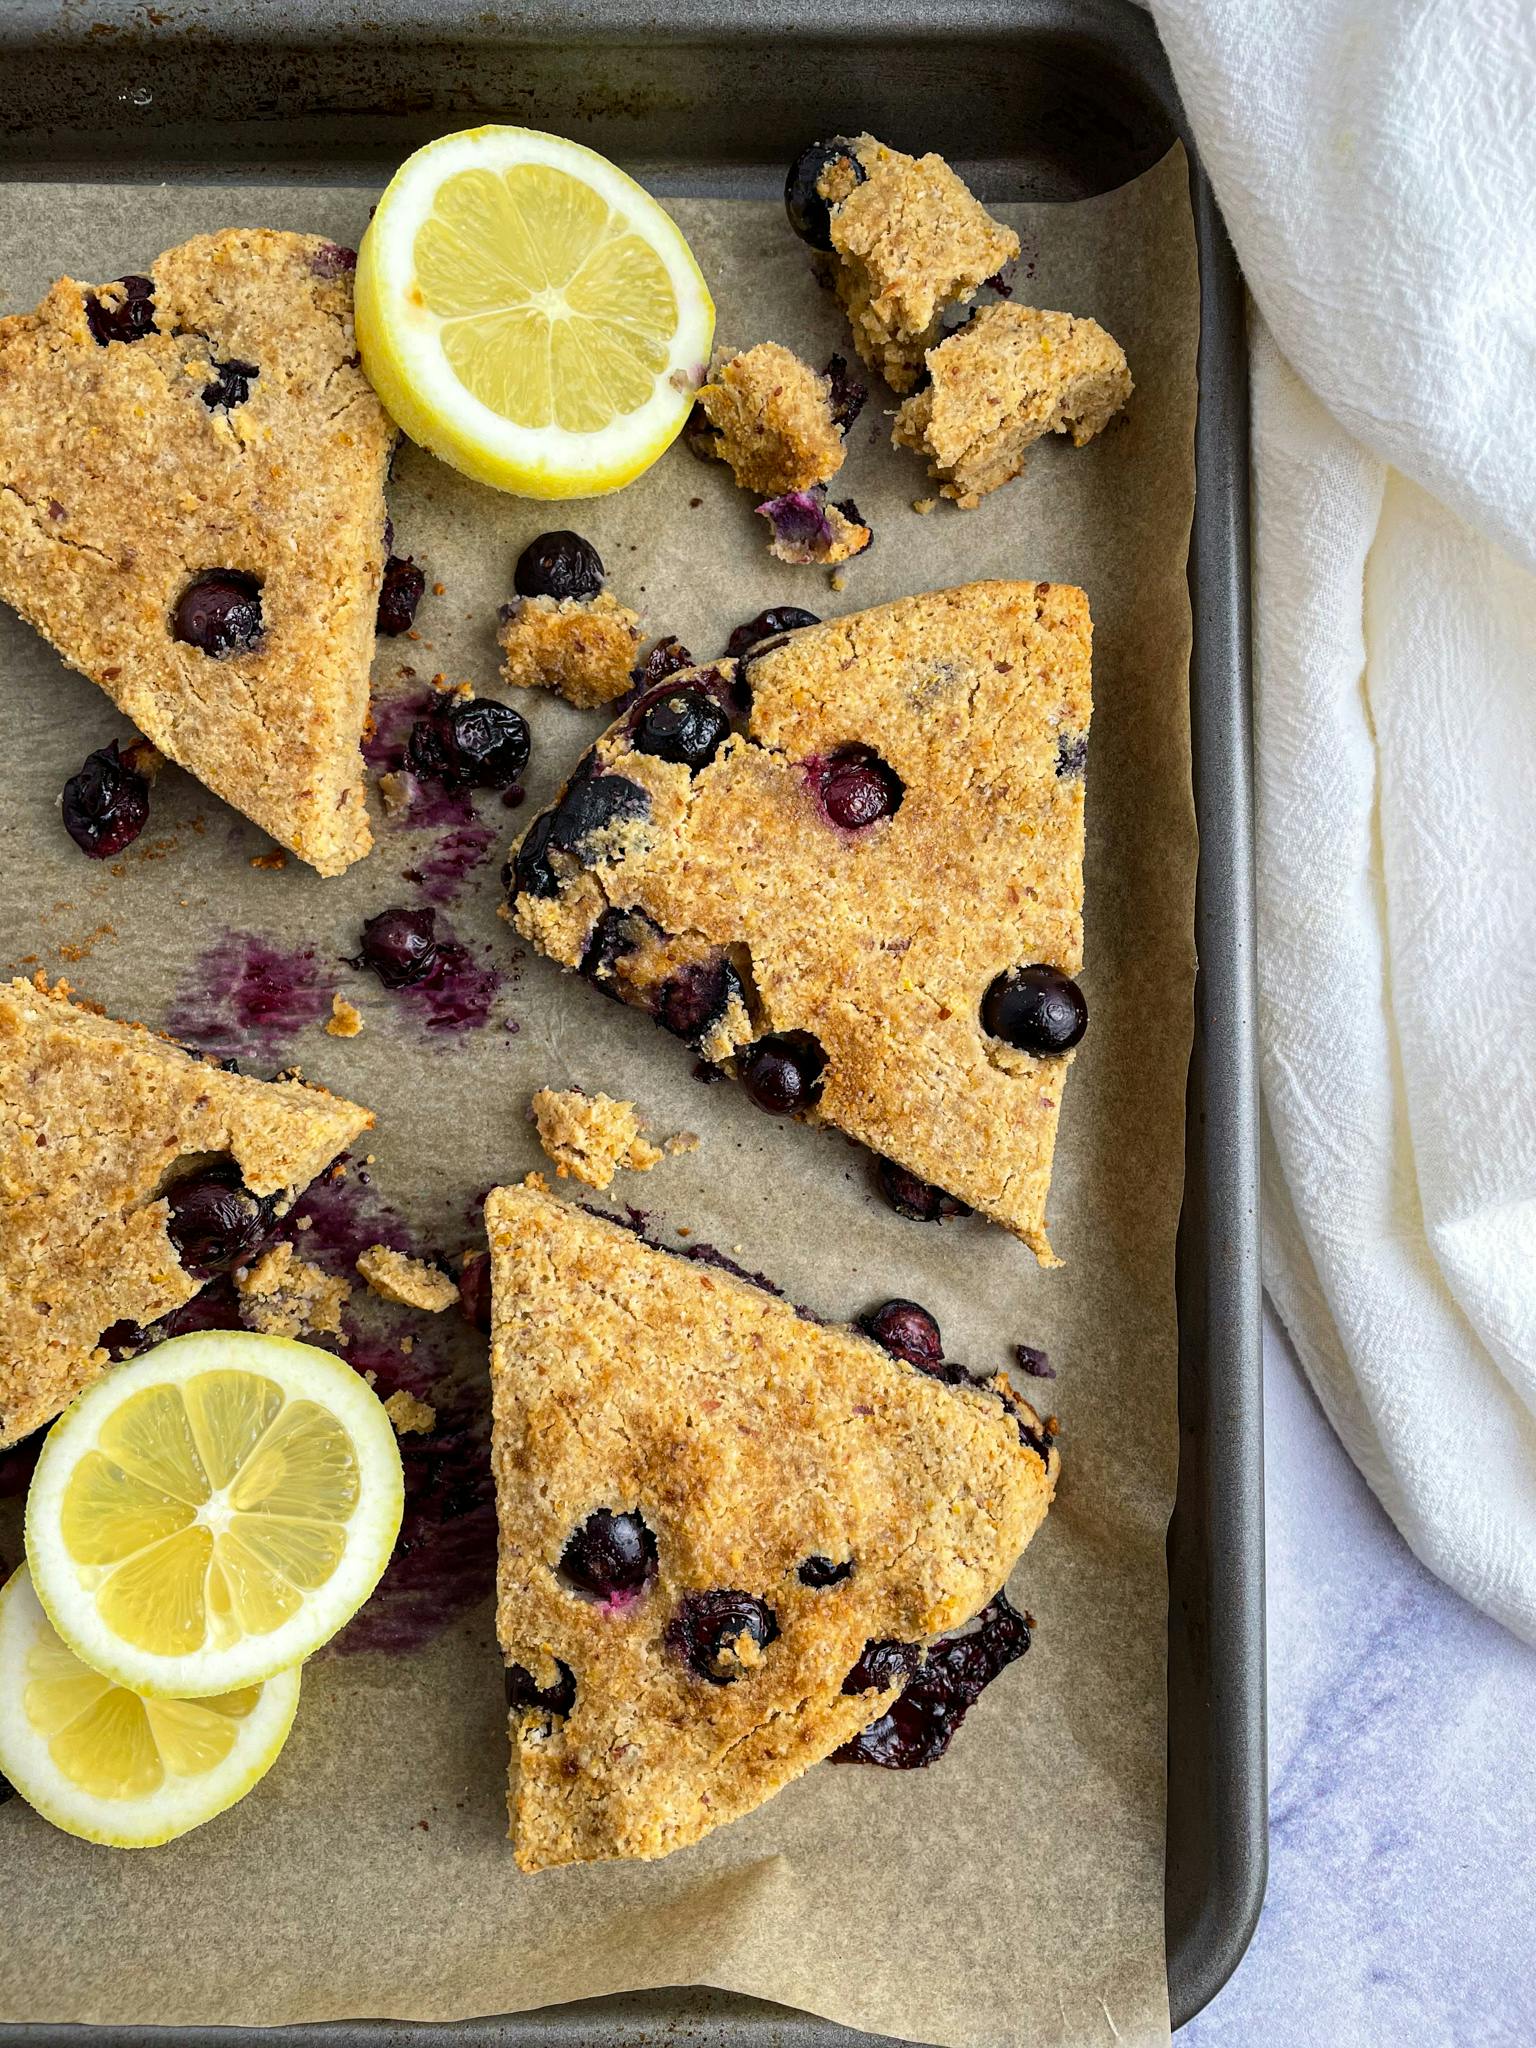 Gluten-free blueberry lemon scones spread out on a baking sheet with slices of lemon around them. There are crumbles of blueberry lemon scones on the top of the baking sheet.